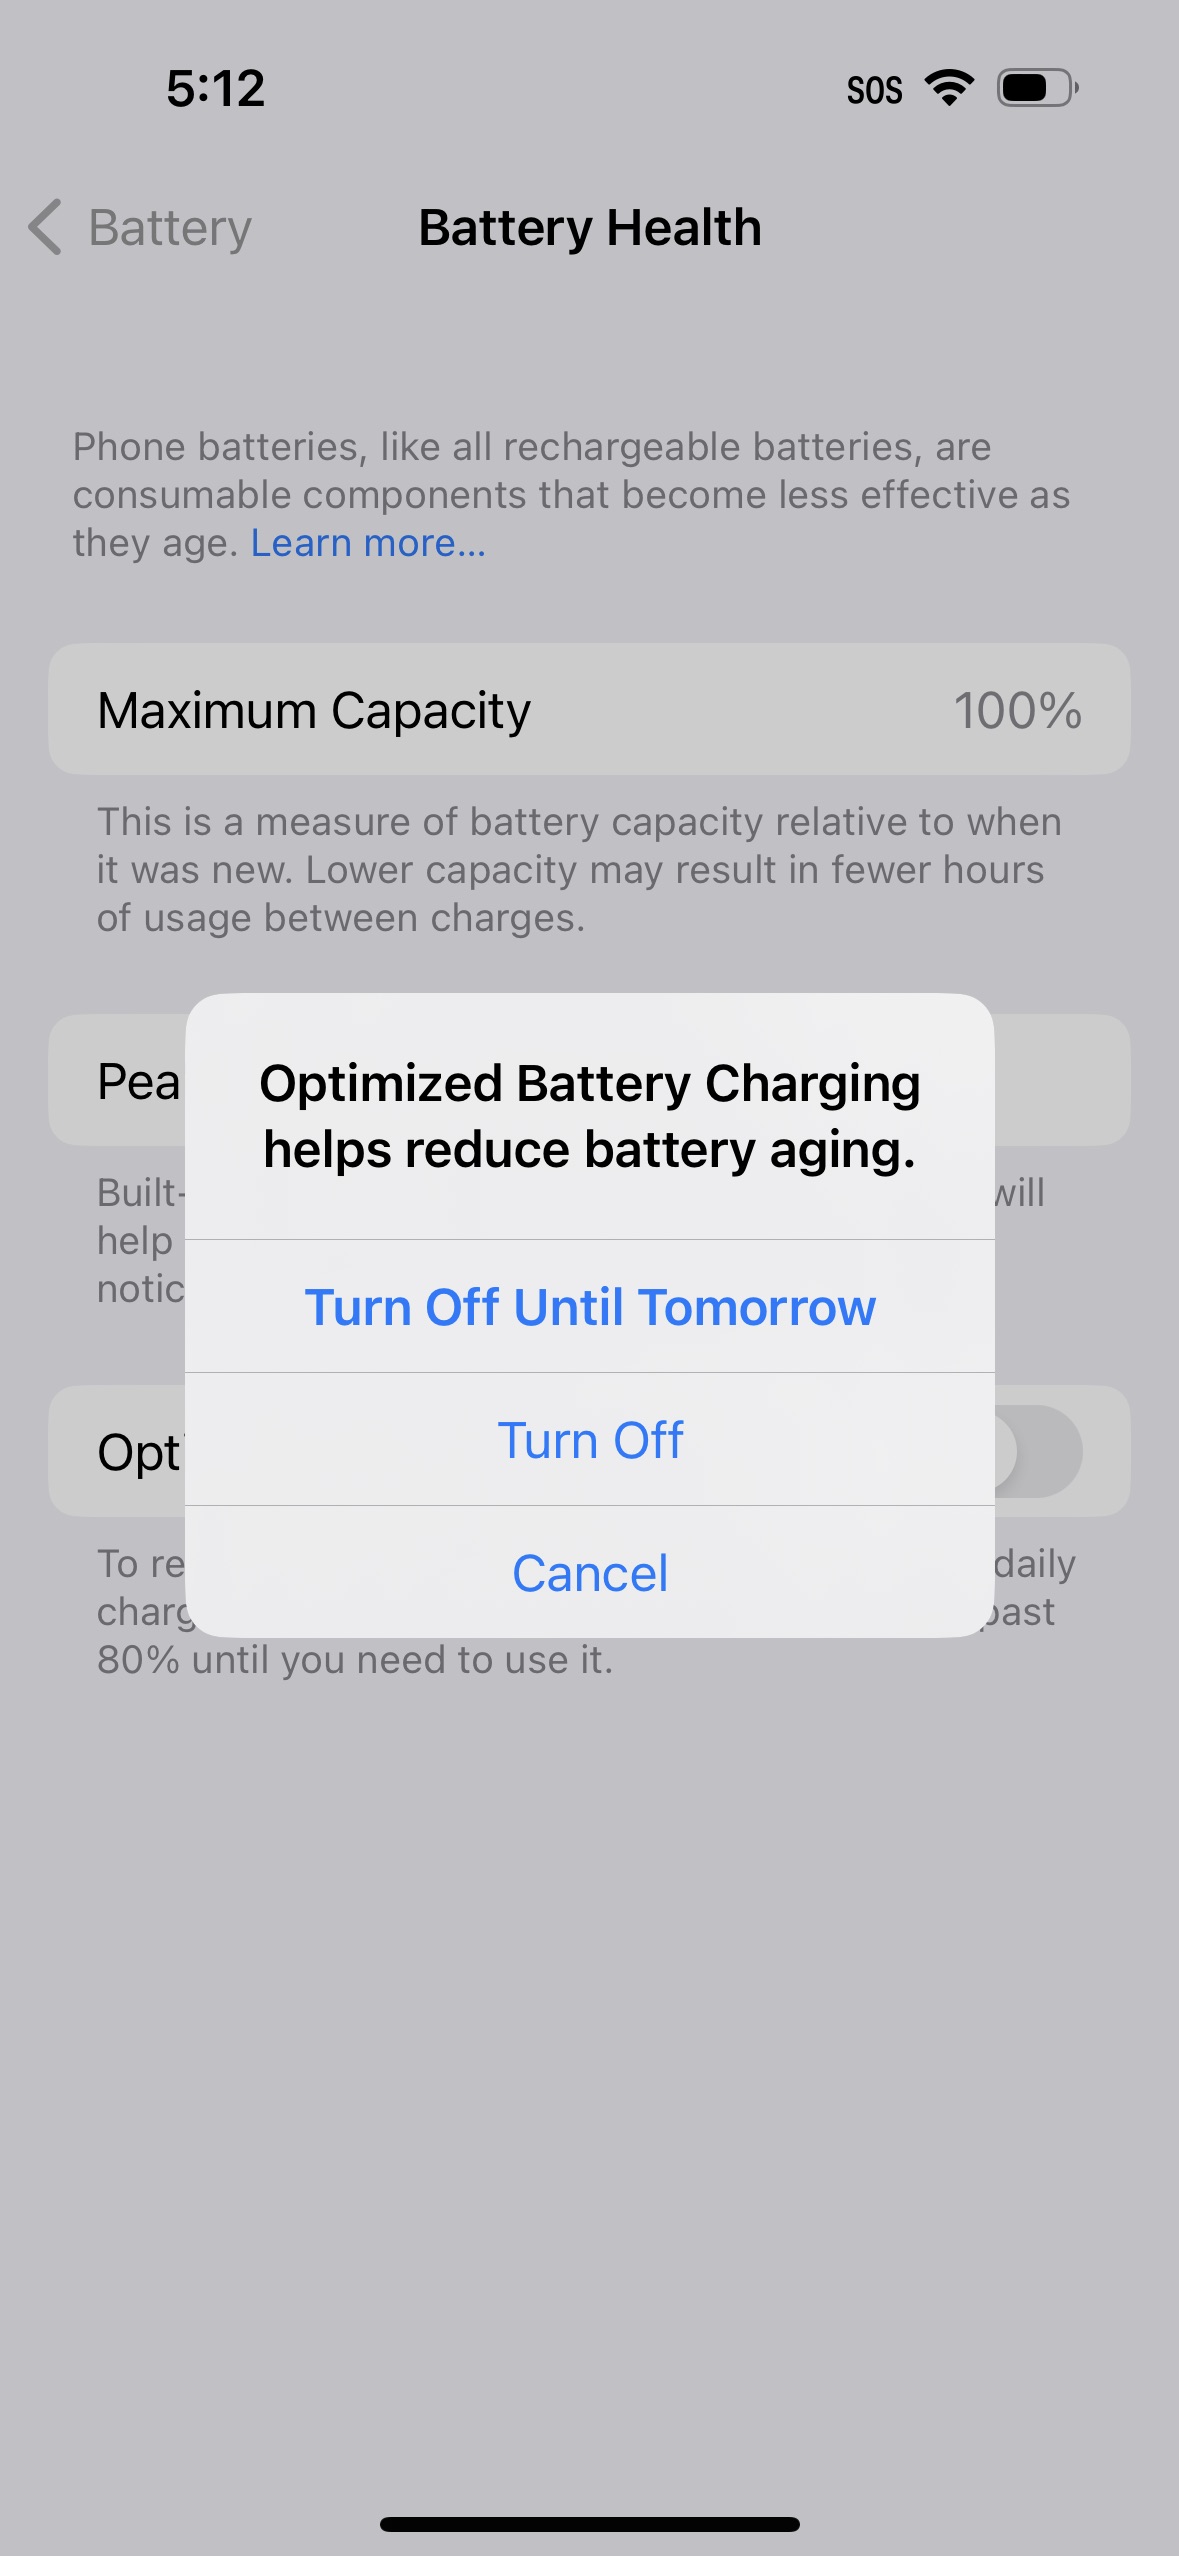 How to Turn Off Optimized Battery Charging on iPhone [Video]